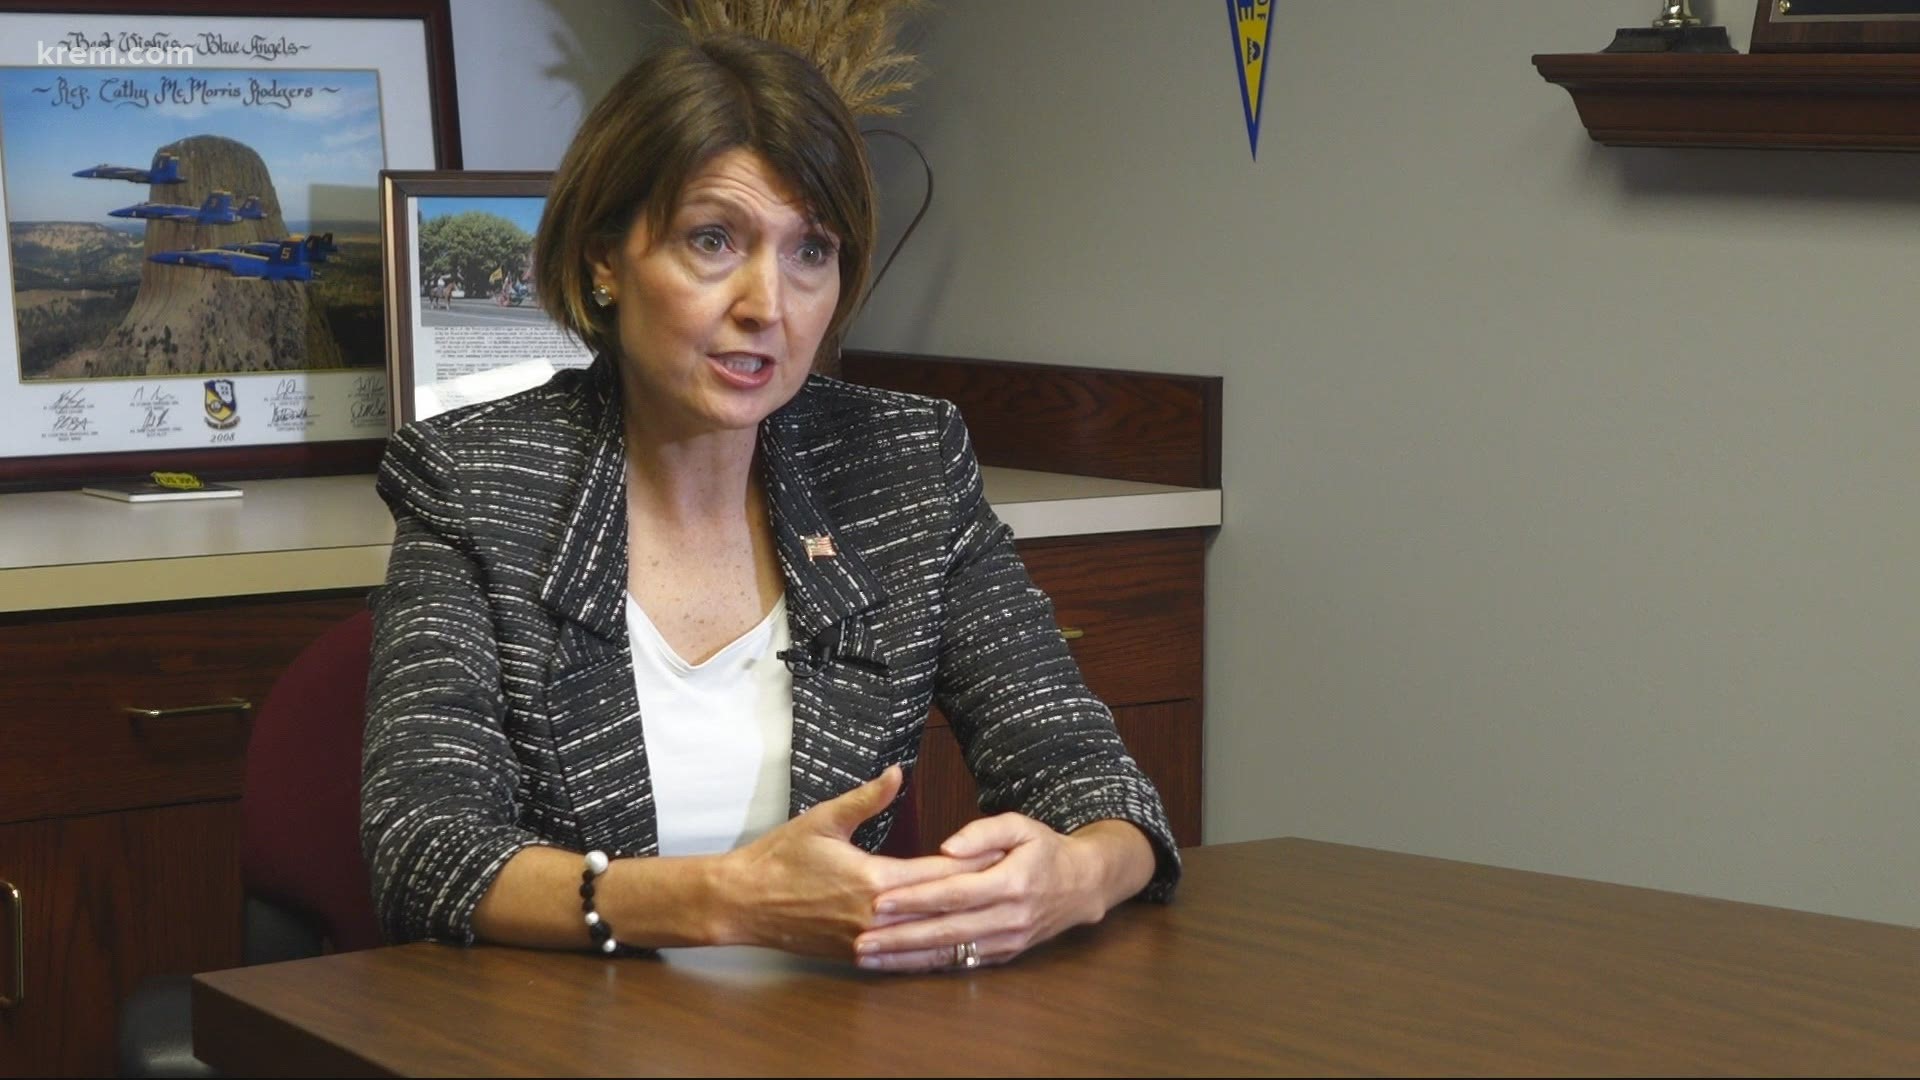 Rep. Cathy McMorris Rodgers talks about our state's coronavirus response so far and how COVID-19 has become political.